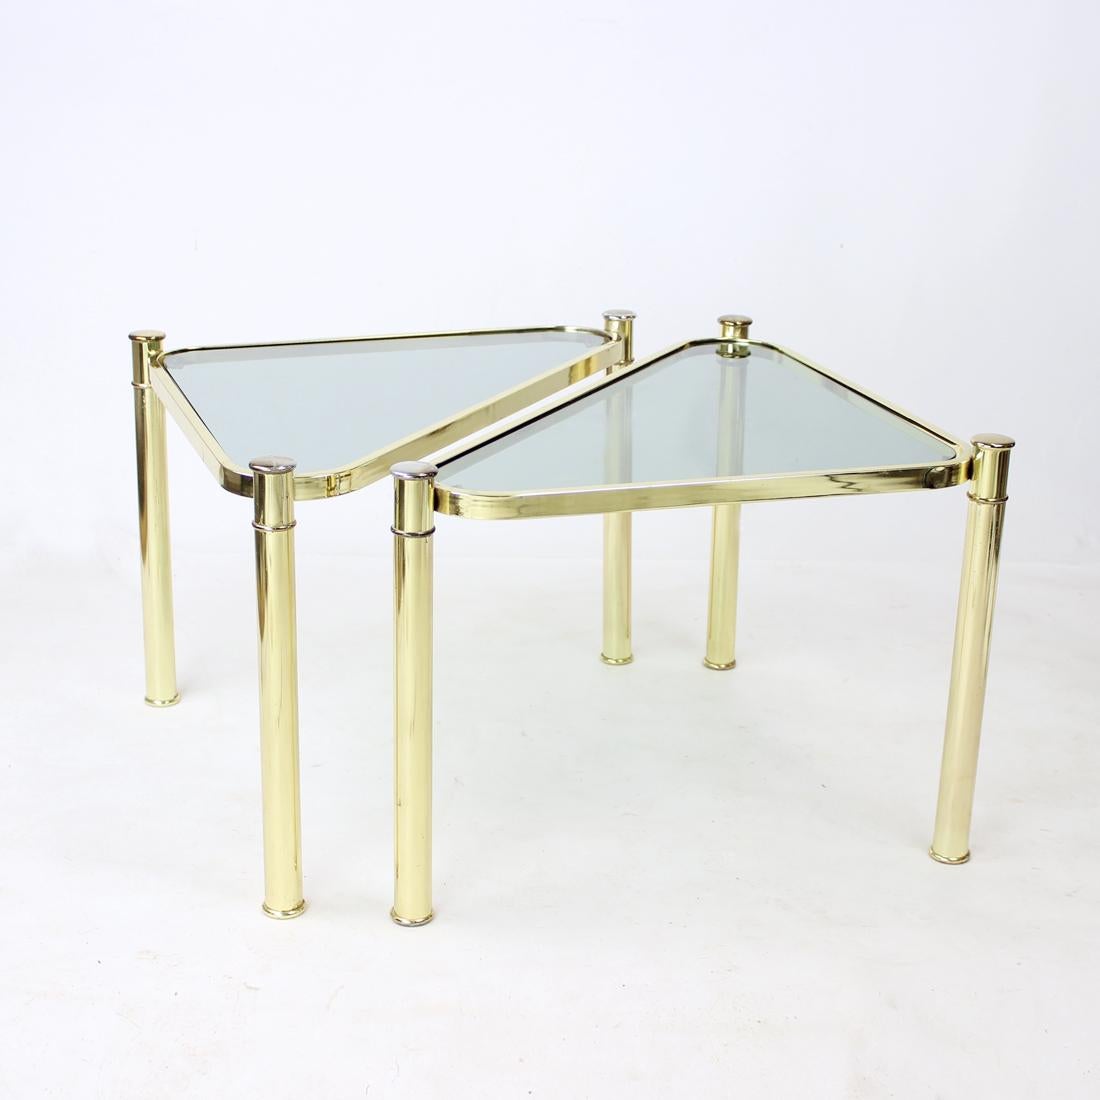 Beautiful set of two side tables made of metal construction with brass finish and smoke glass tops. The shape of the tables is triangles with curved edges. The tables can be easily placed in a variety of shapes, they can be used together or